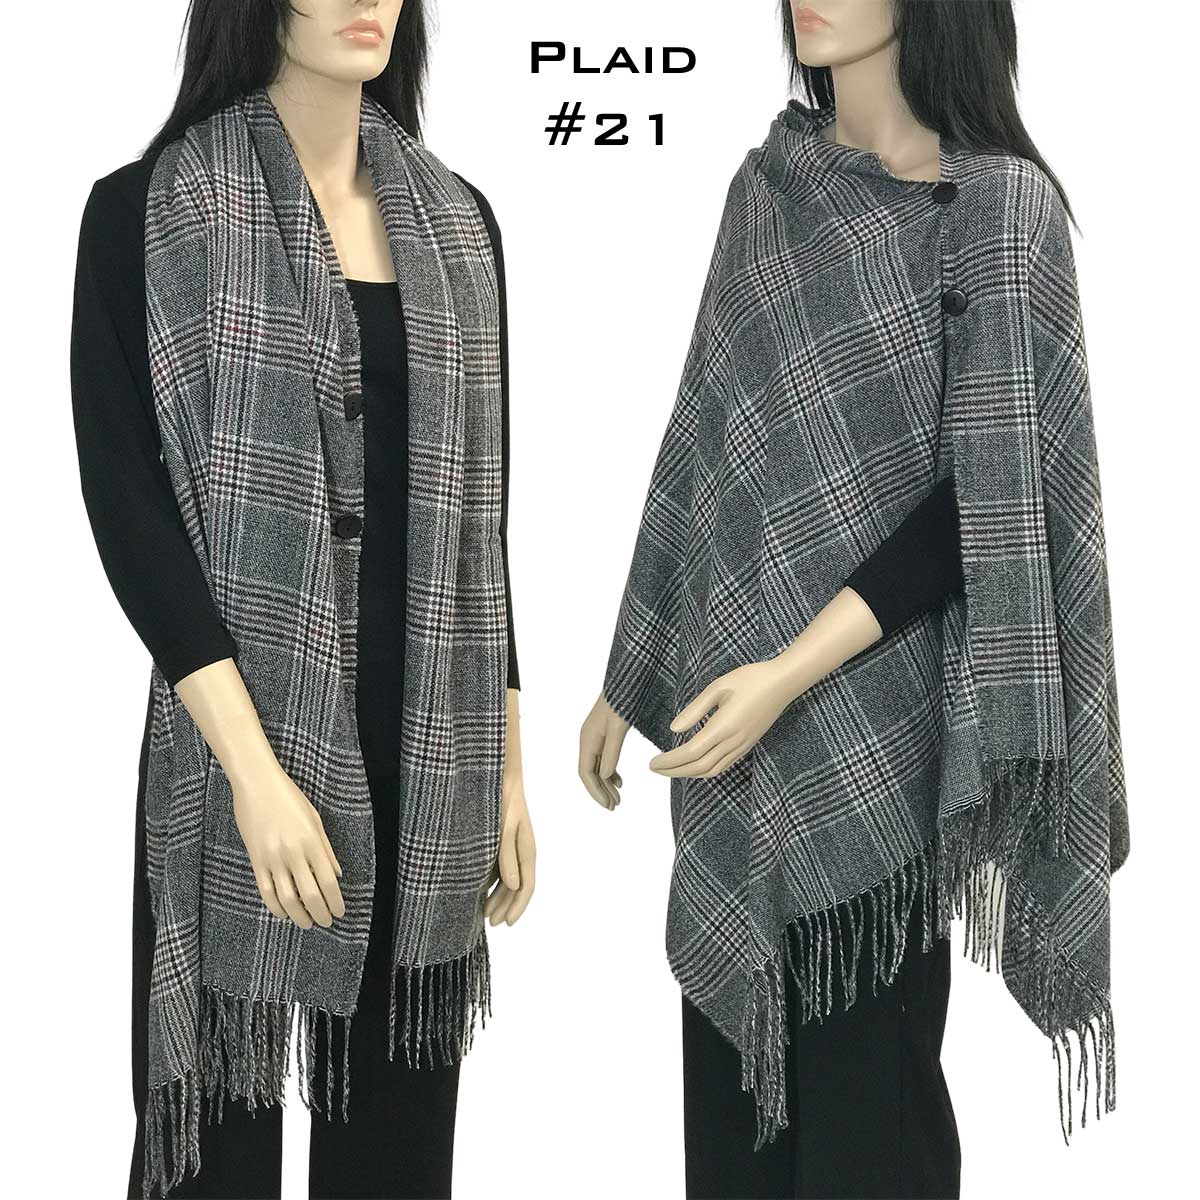 3306 PLAID GREY #21 with Black Buttons